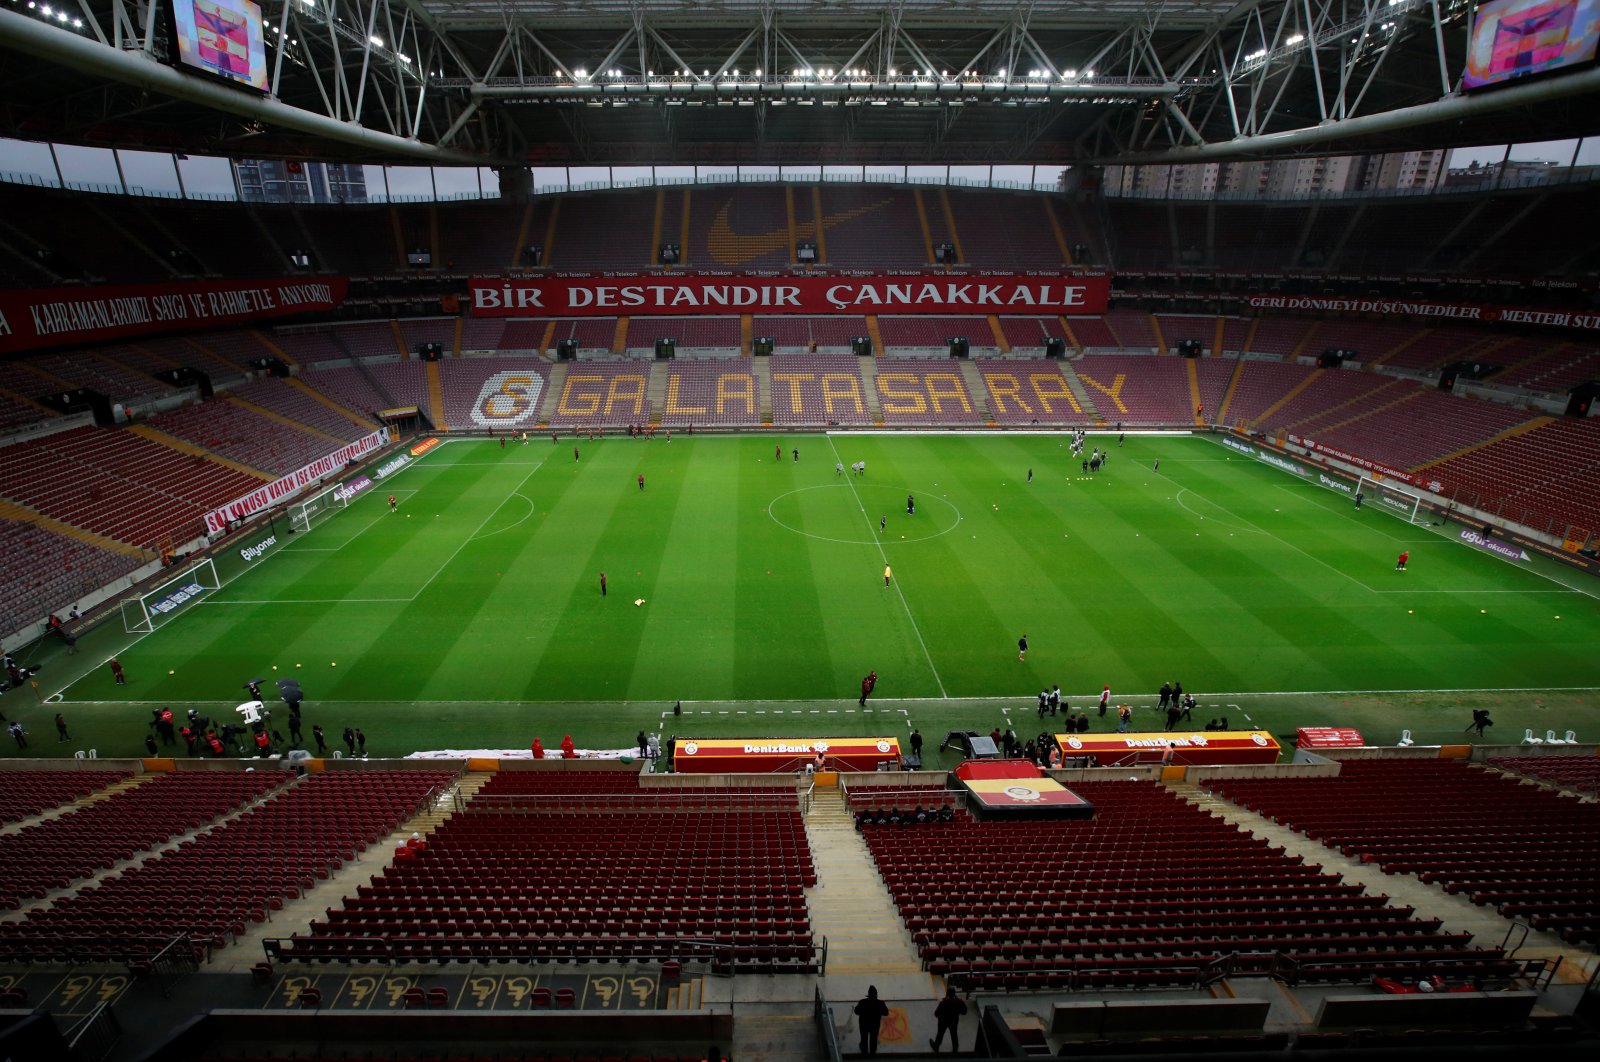 Stands were left empty during the Süper Lig match between Galatasaray and Beşiktaş as it was played behind closed doors due to the coronavirus outbreak, Istanbul, March 15, 2020. (Reuters Photo)